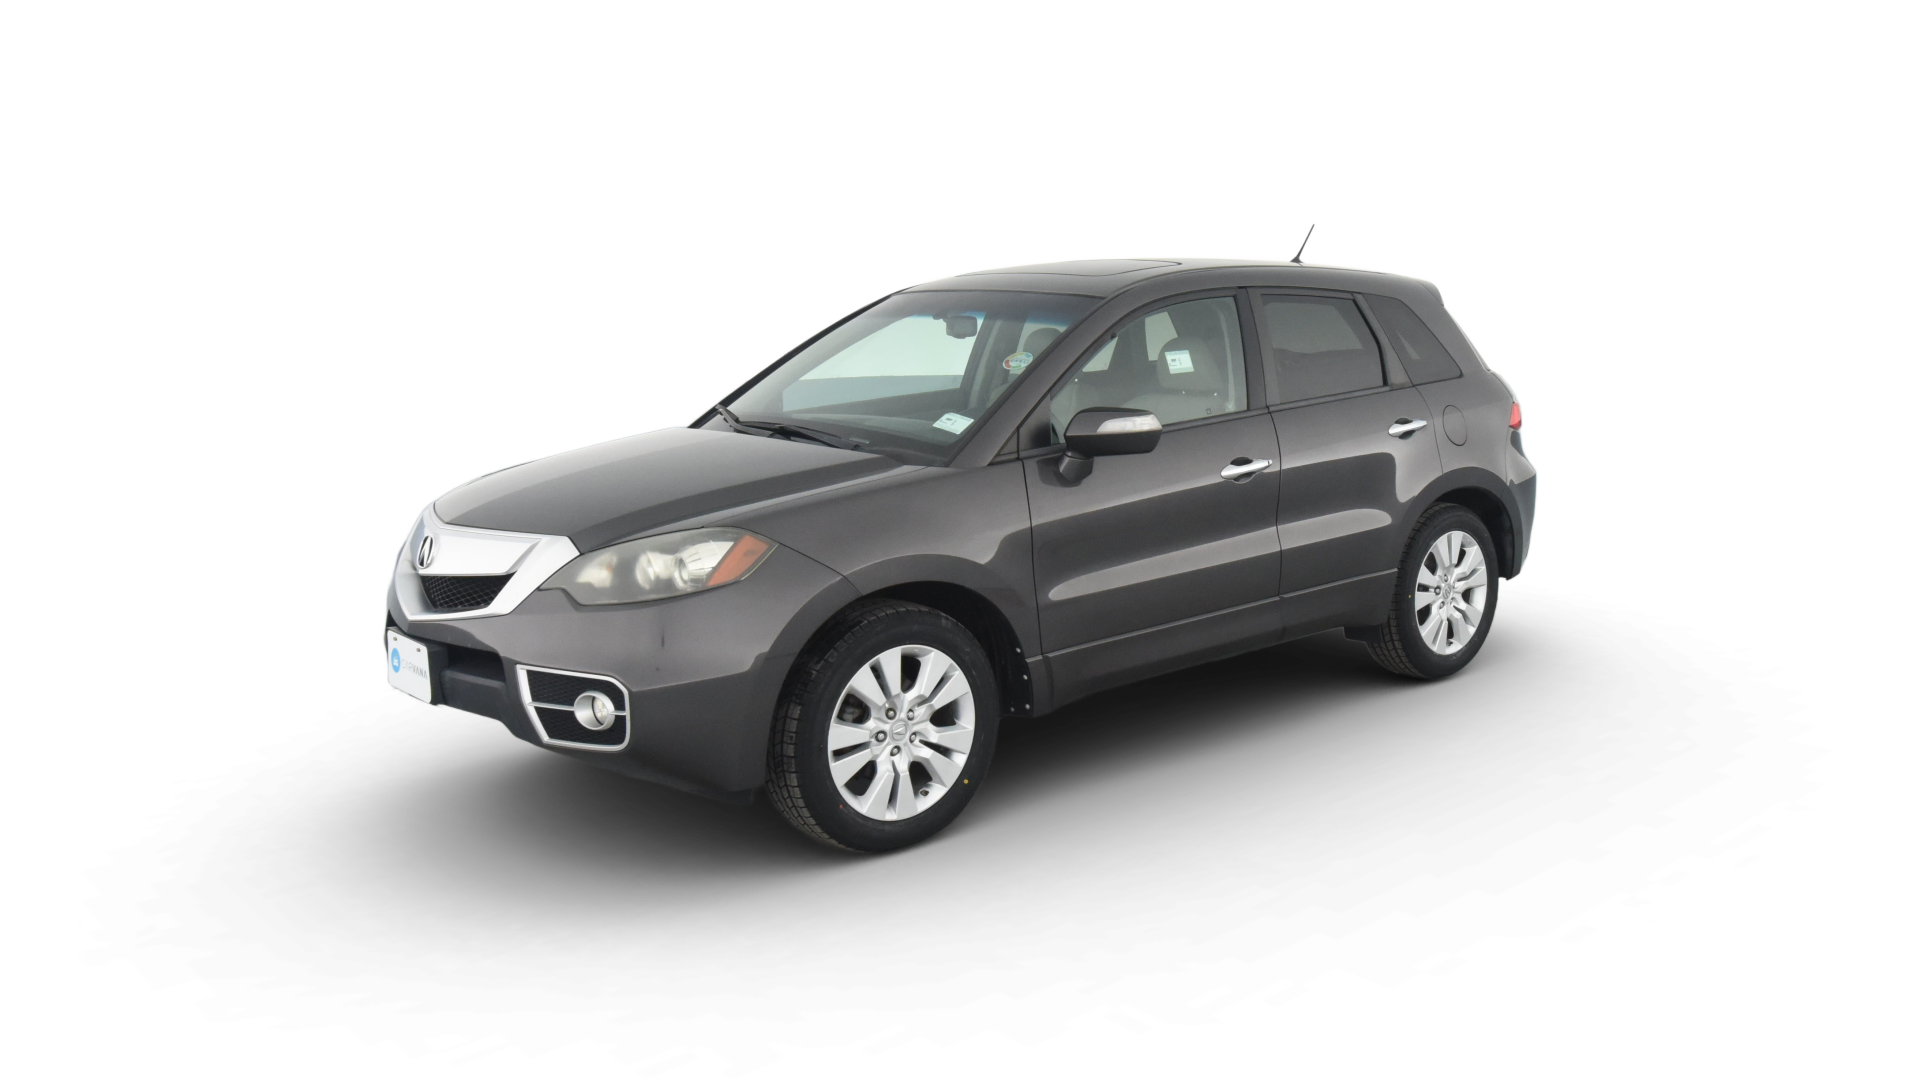 Used 2011 Acura RDX For Sale Online | Carvana